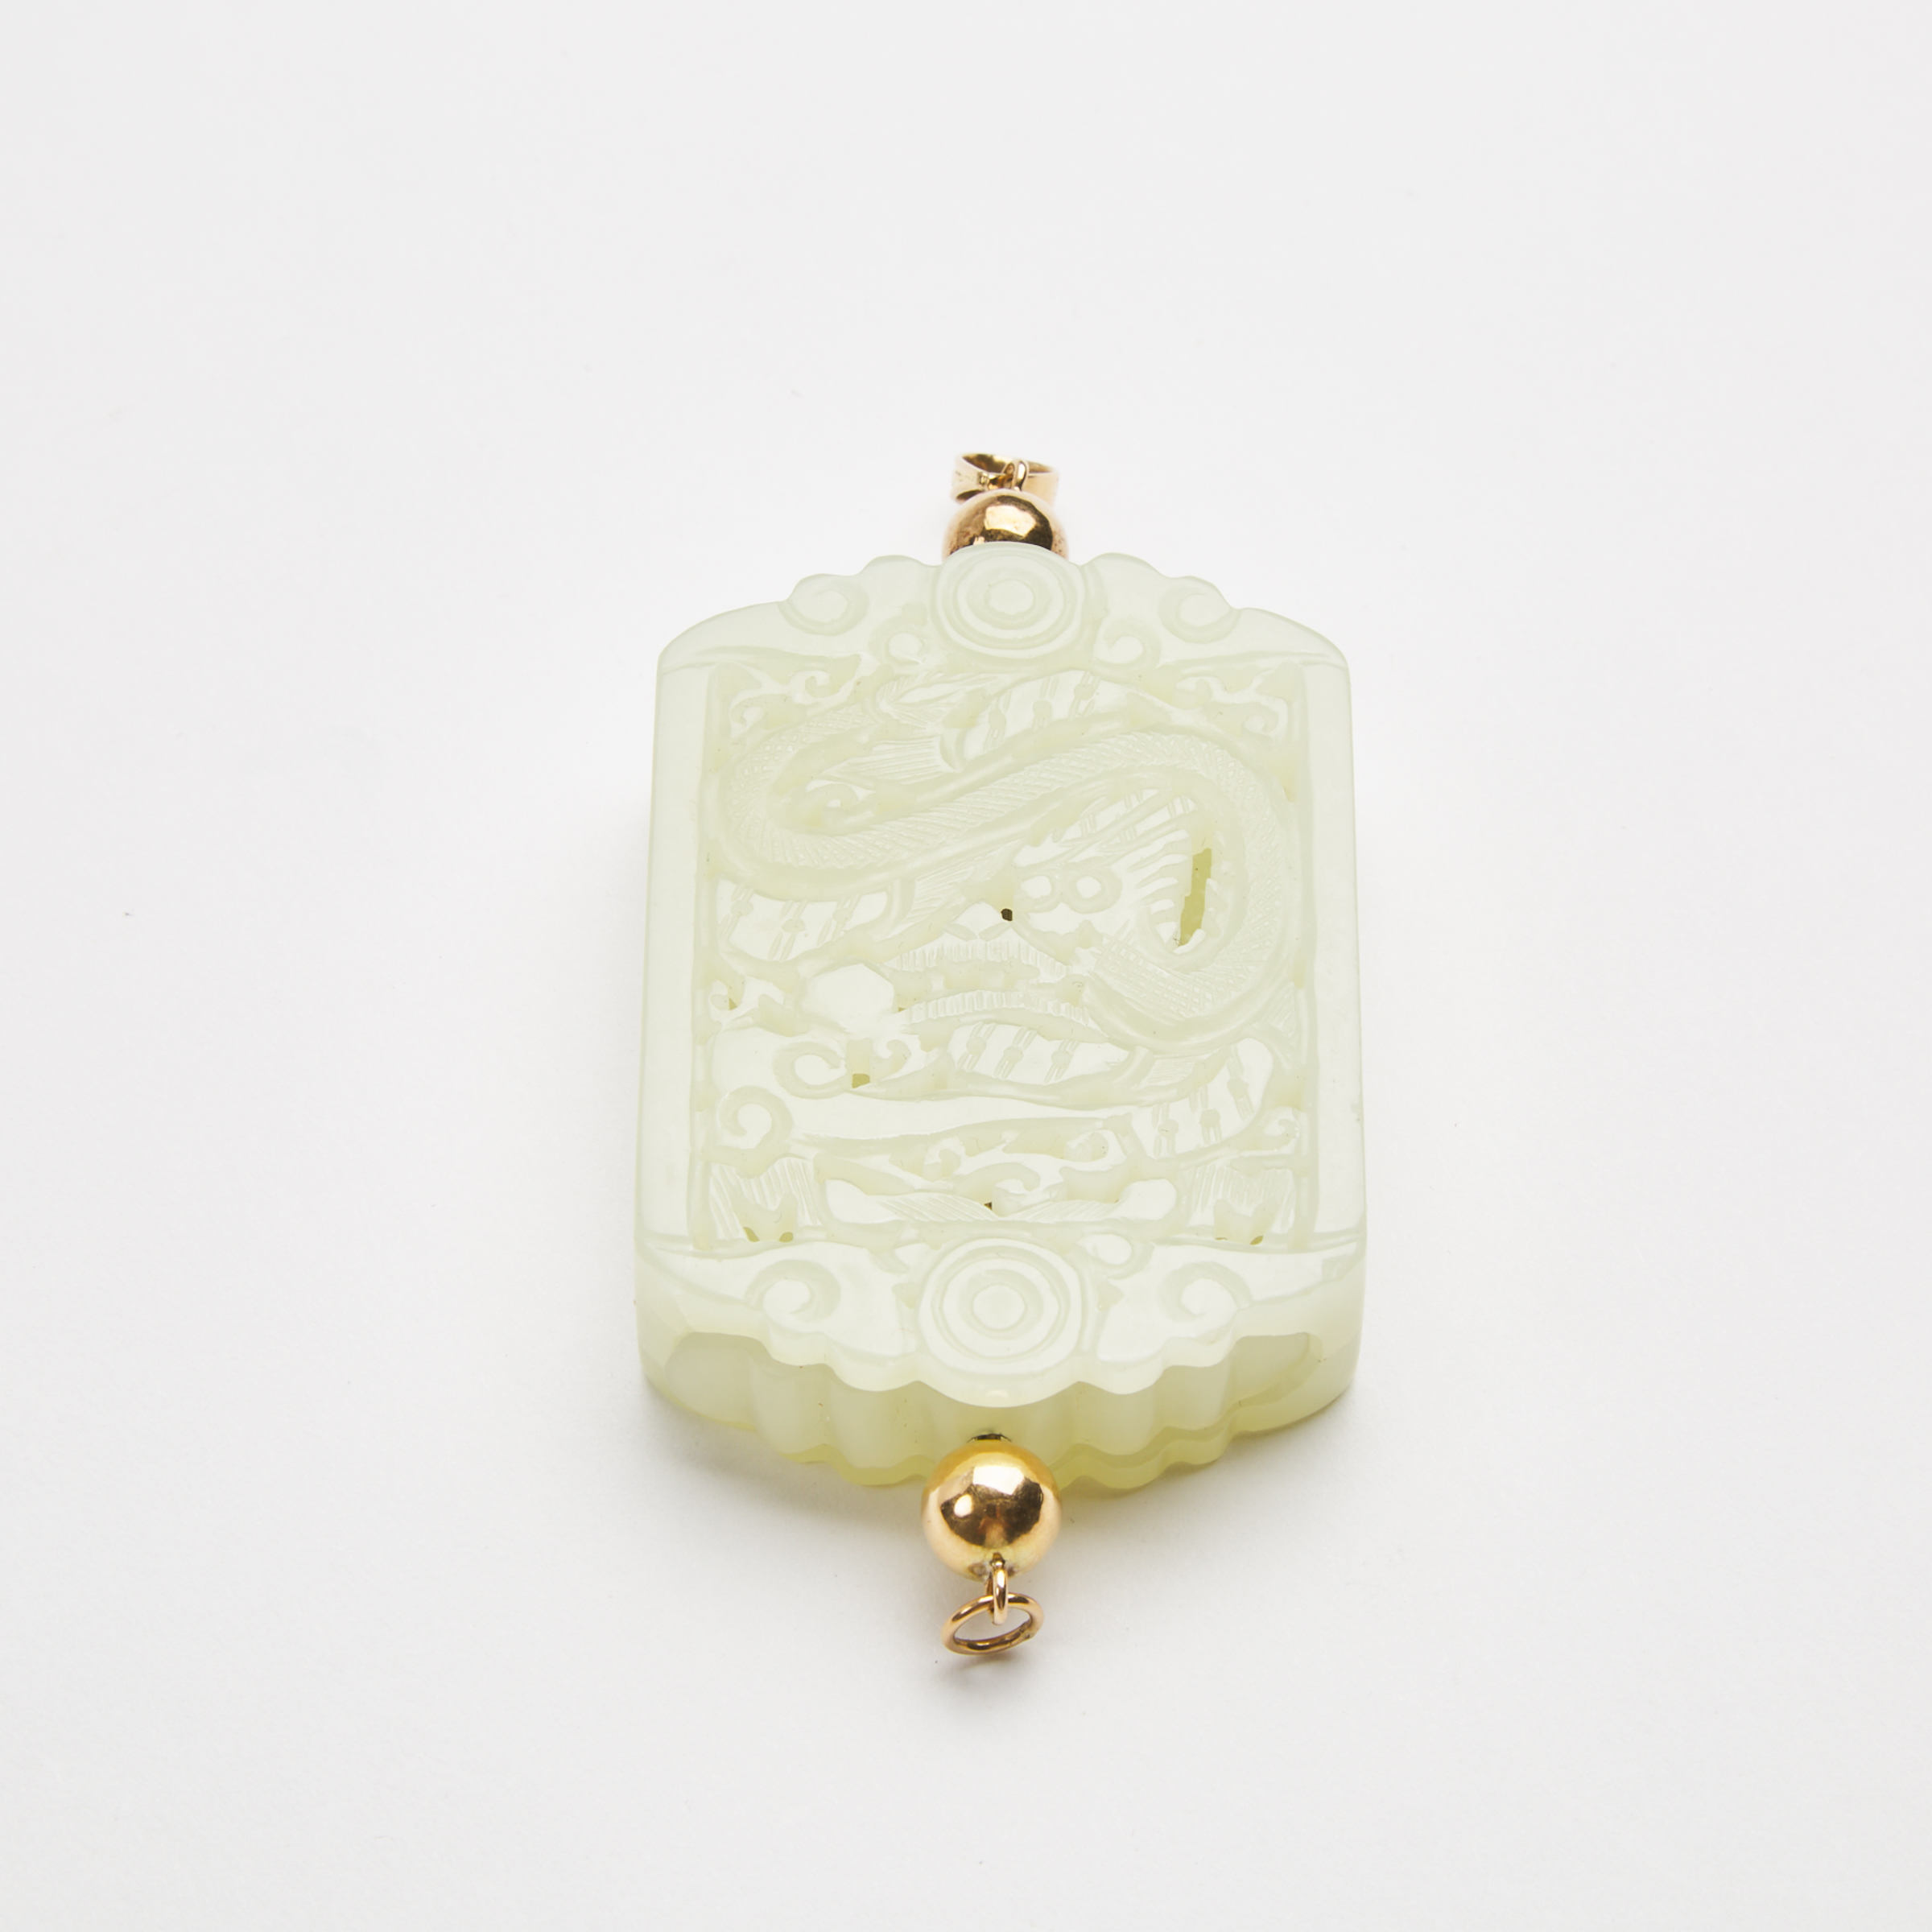 A Reticulated White Jade Pomander, 19th Century or Later